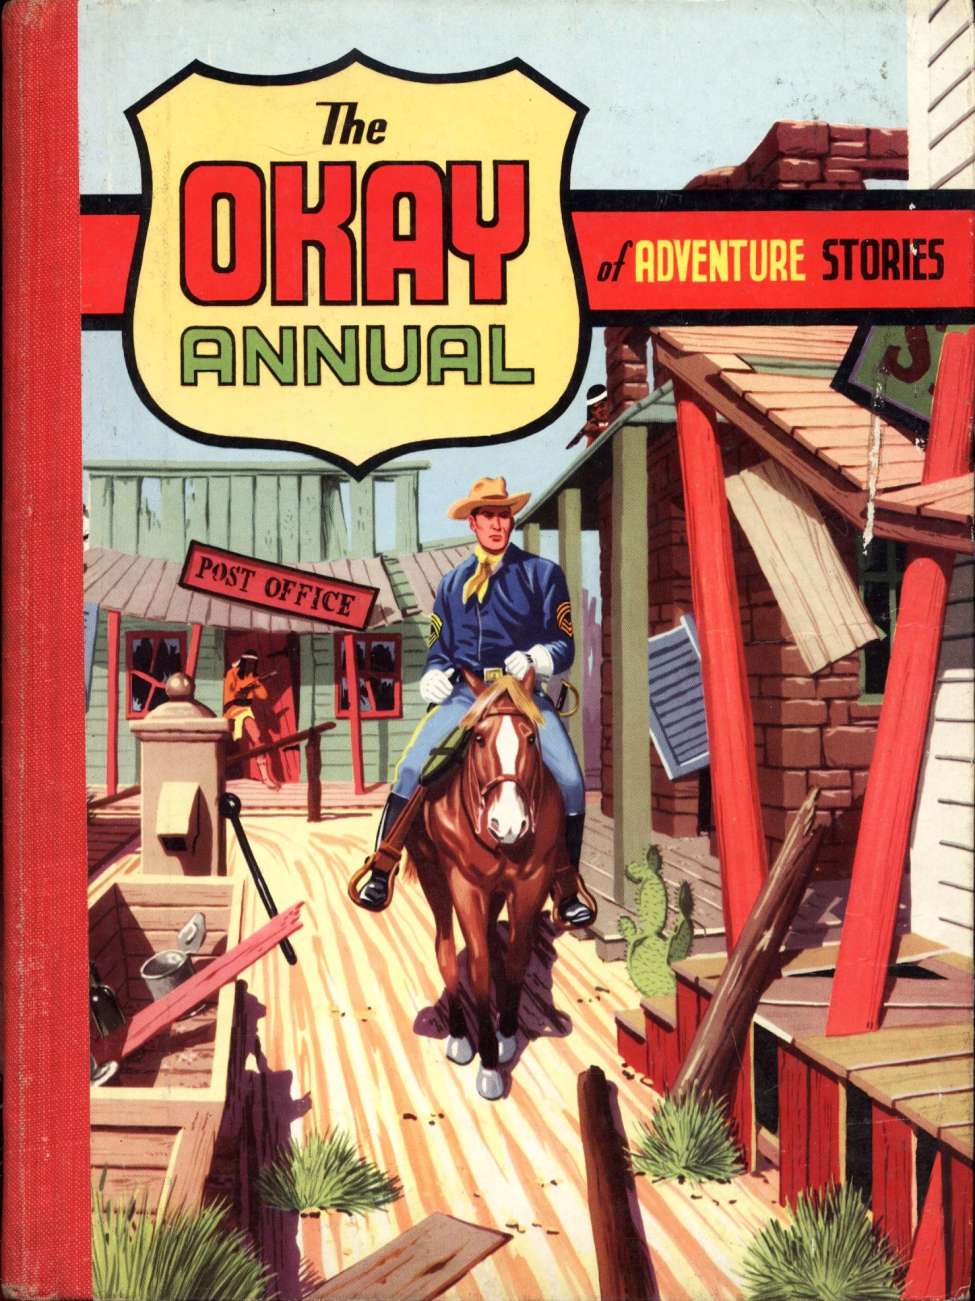 Comic Book Cover For Okay Annual of Adventure Stories 2